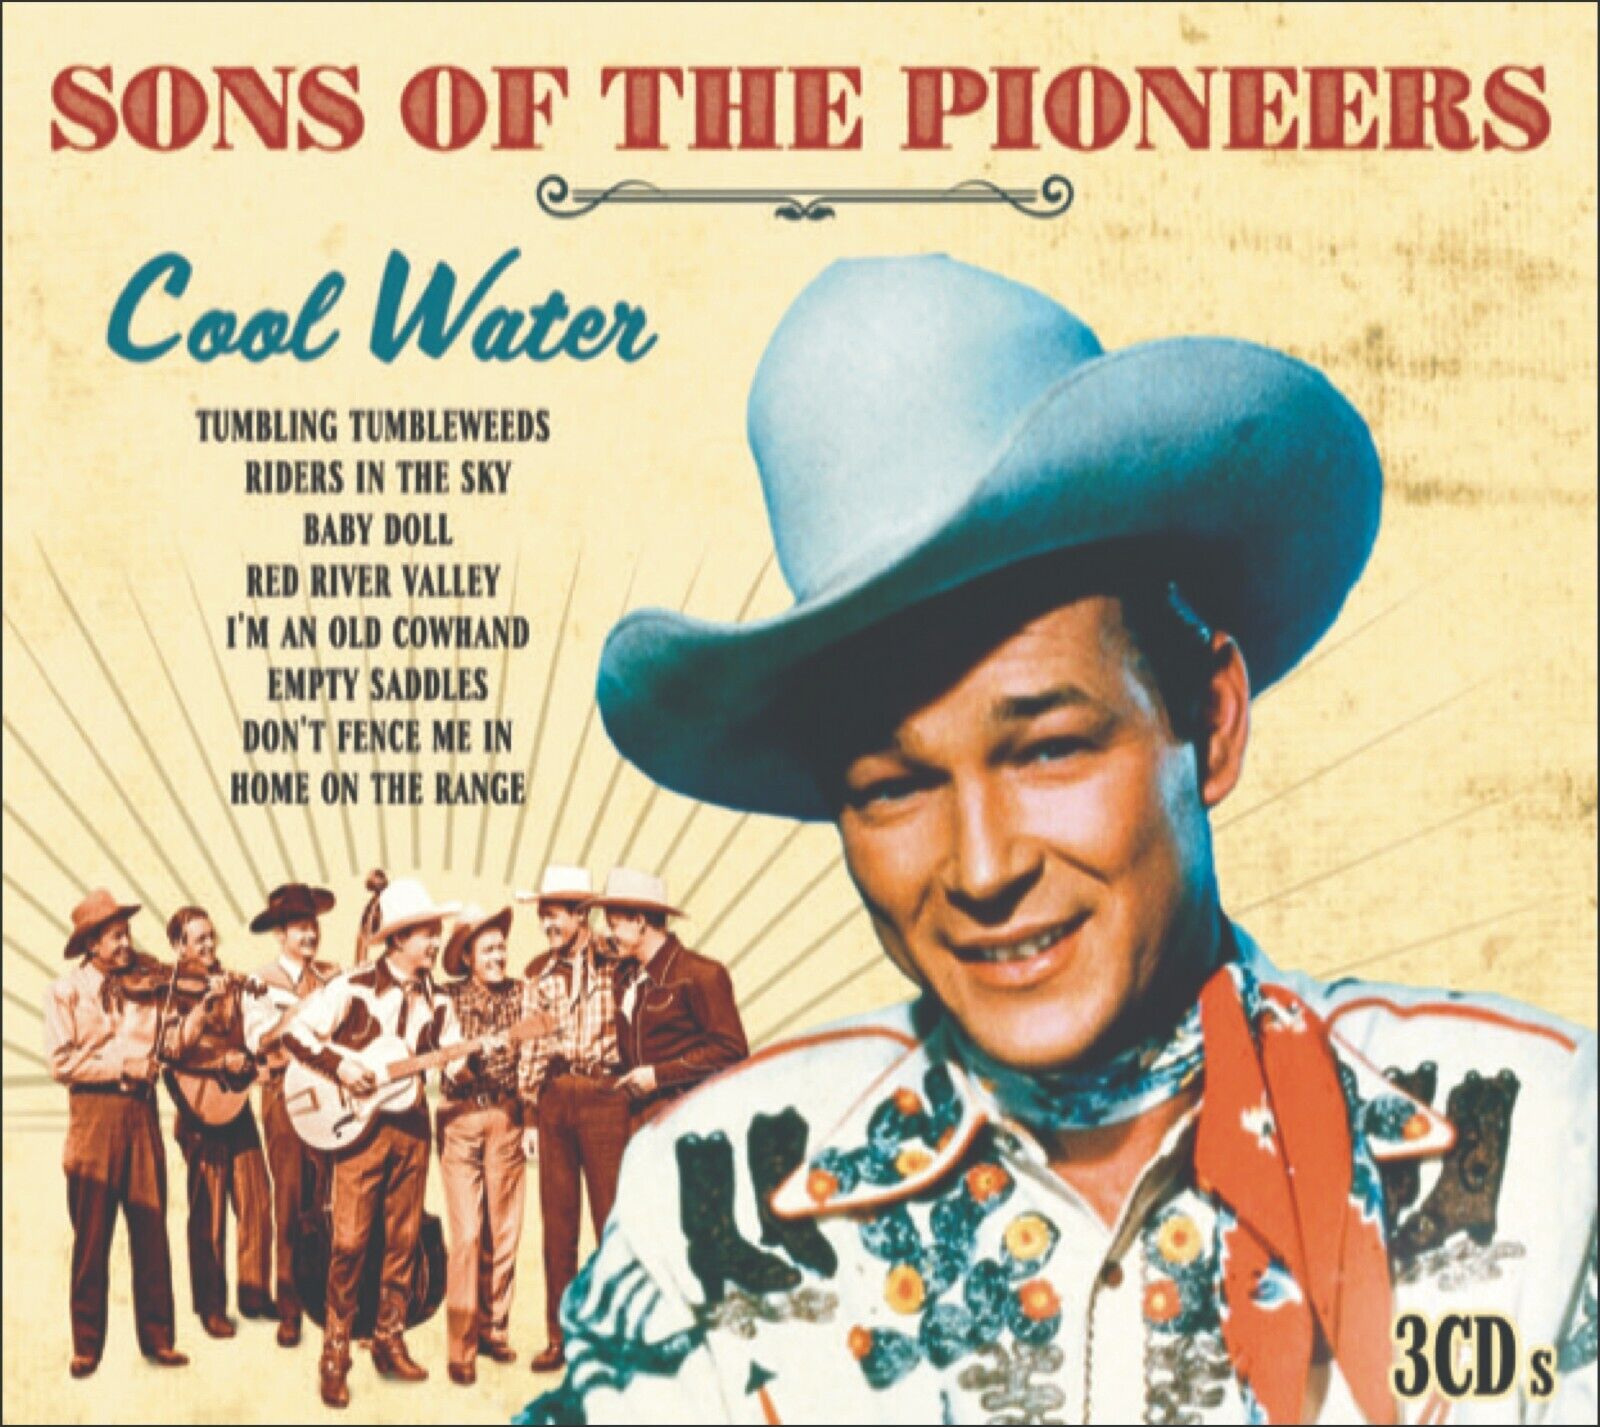 SONS OF THE PIONEERS (Roy Rogers) * 75 Greatest Hits * NEW 3-CD Set * Cool Water